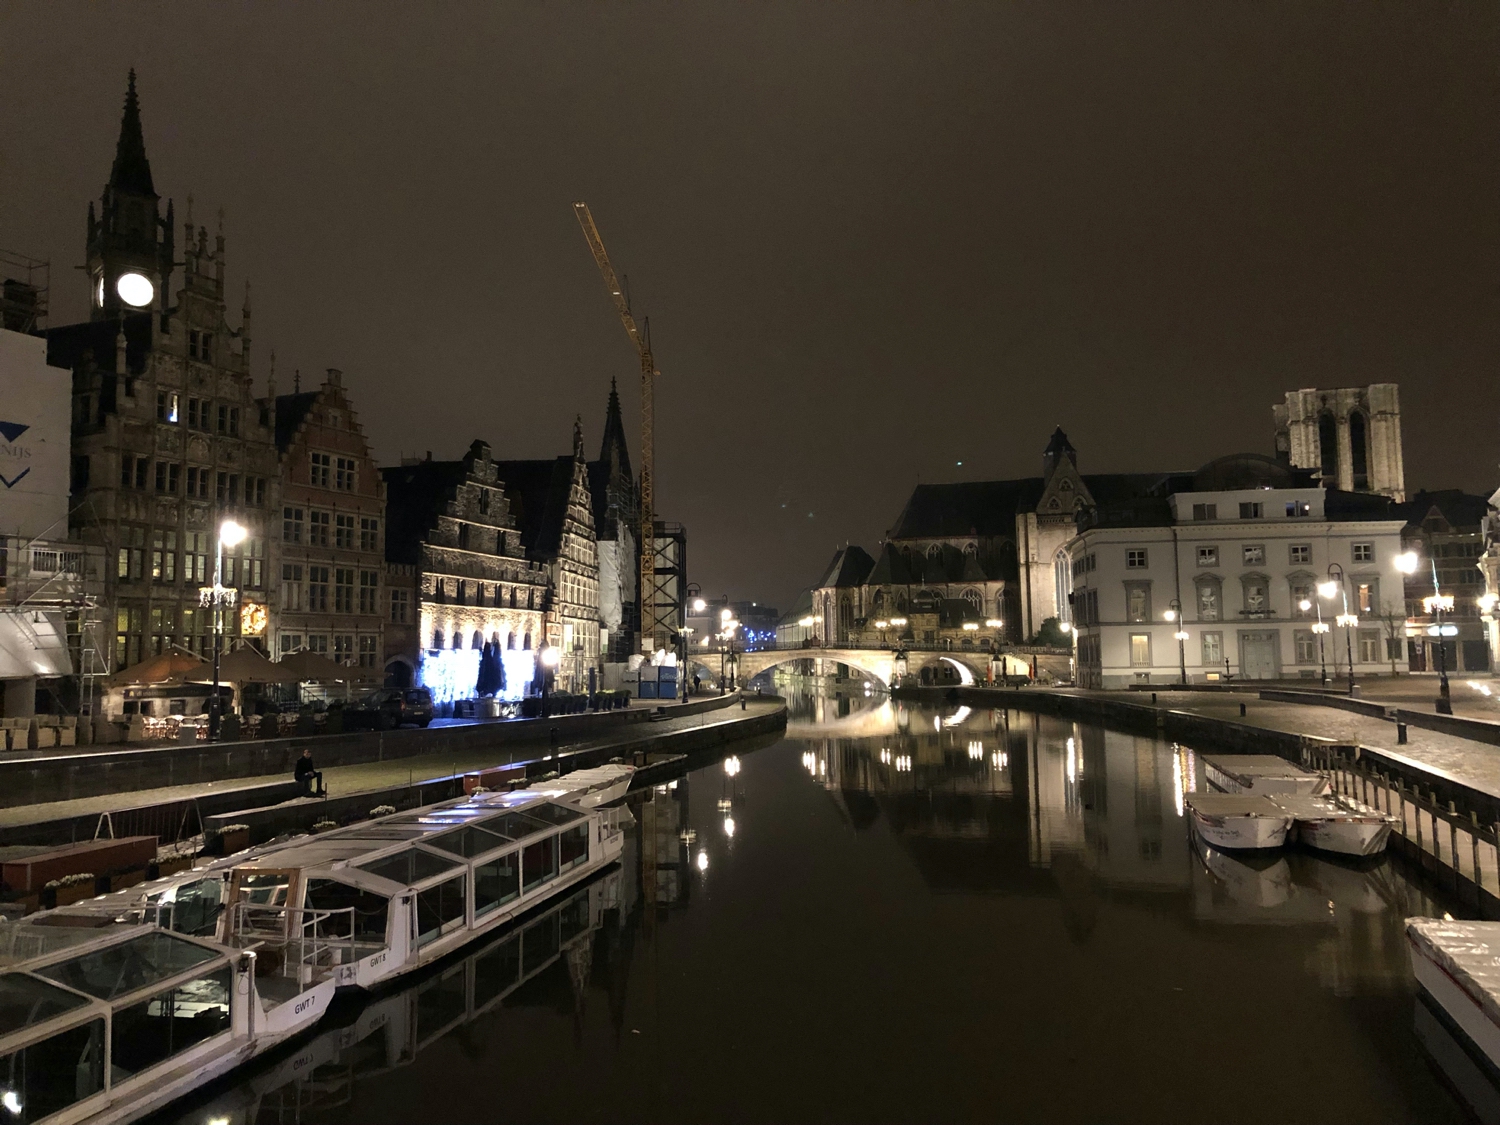 View of old buildings in Ghent over a canal at night.